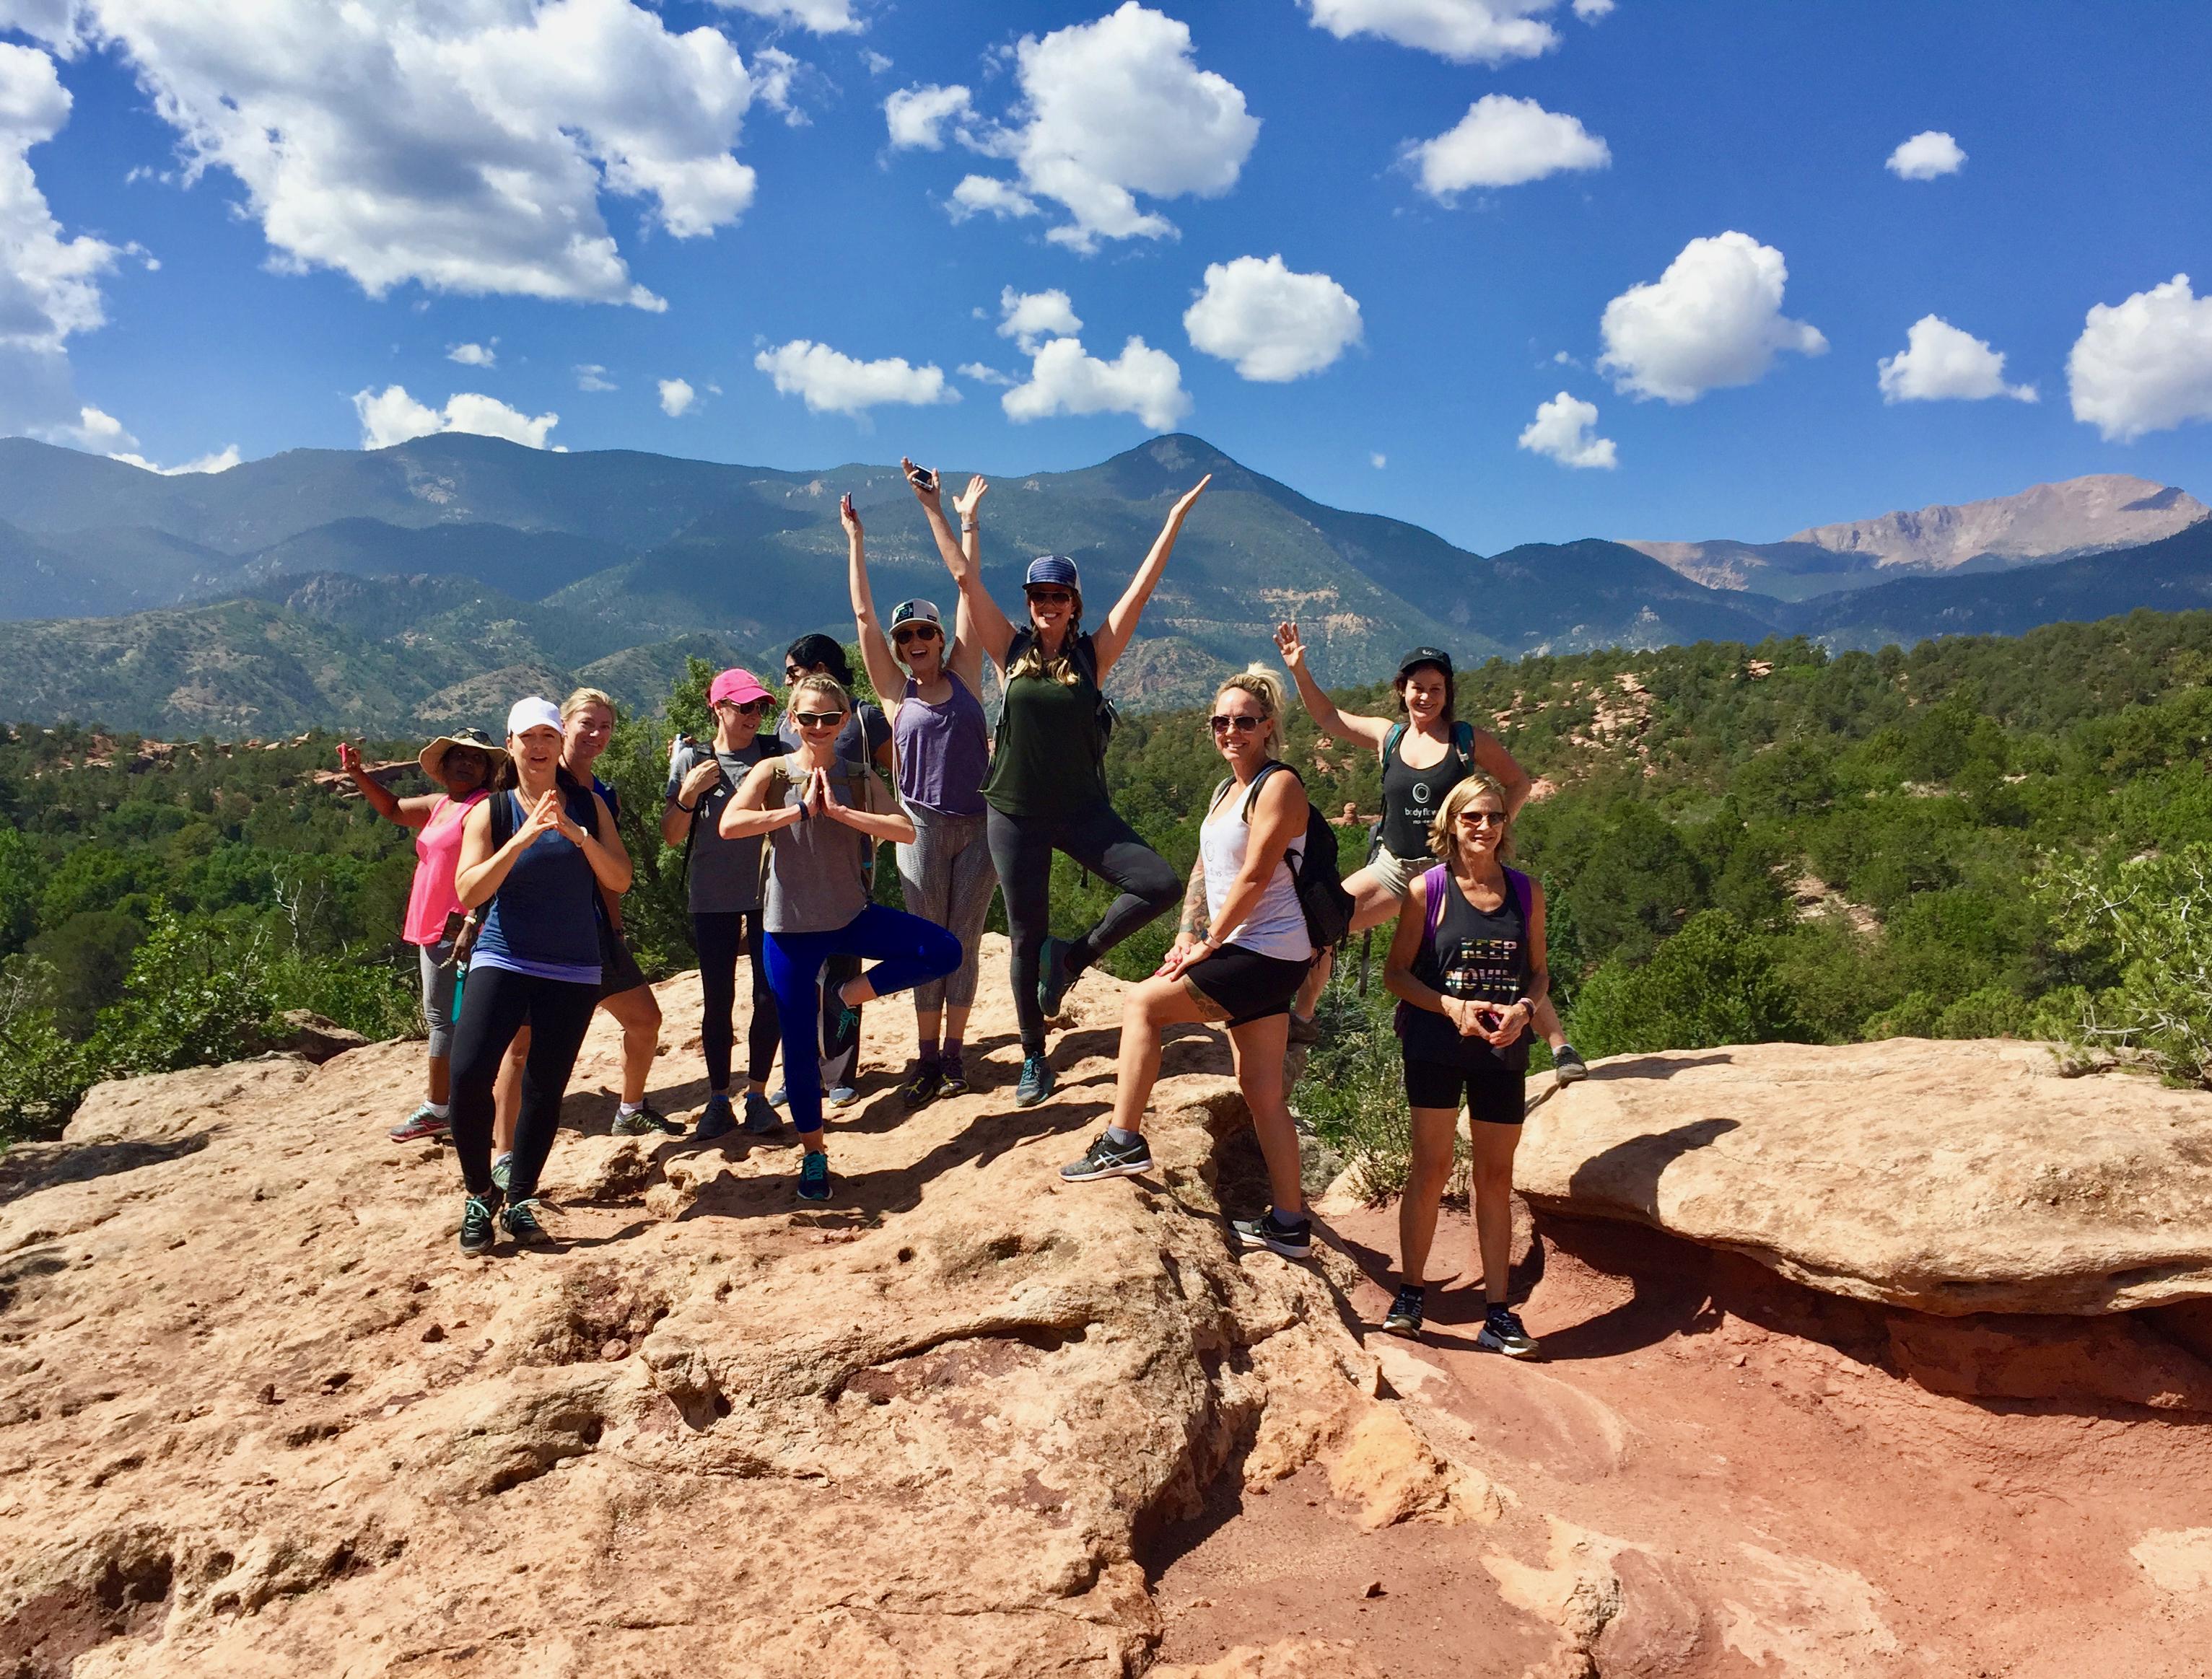 Body Flows Colorado Yoga Retreat with Hiking and Hot Springs - October 2020